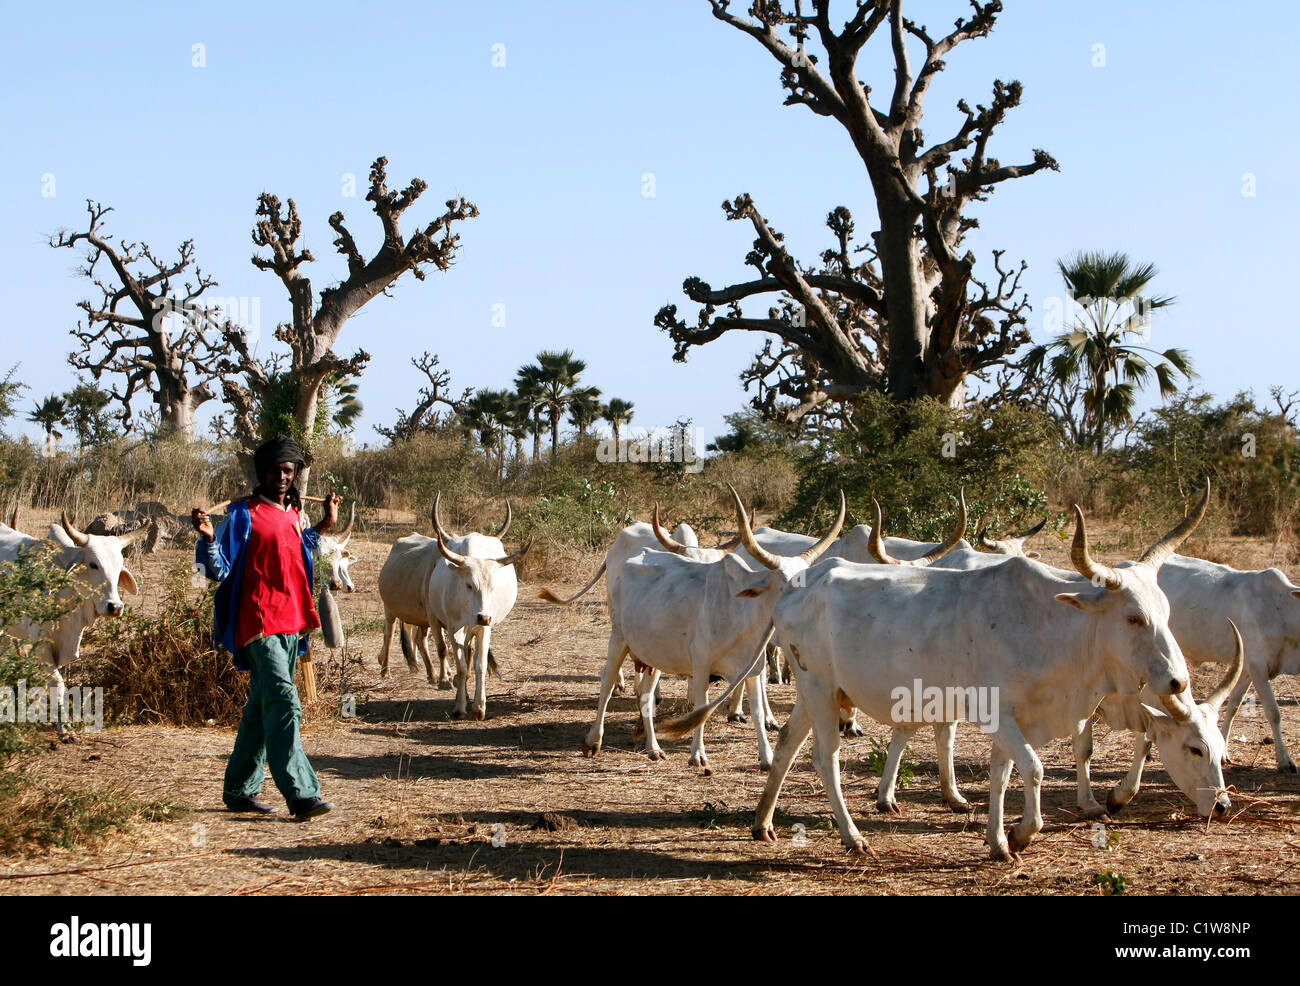 Herdsman with cattle in Senegal Stock Photo